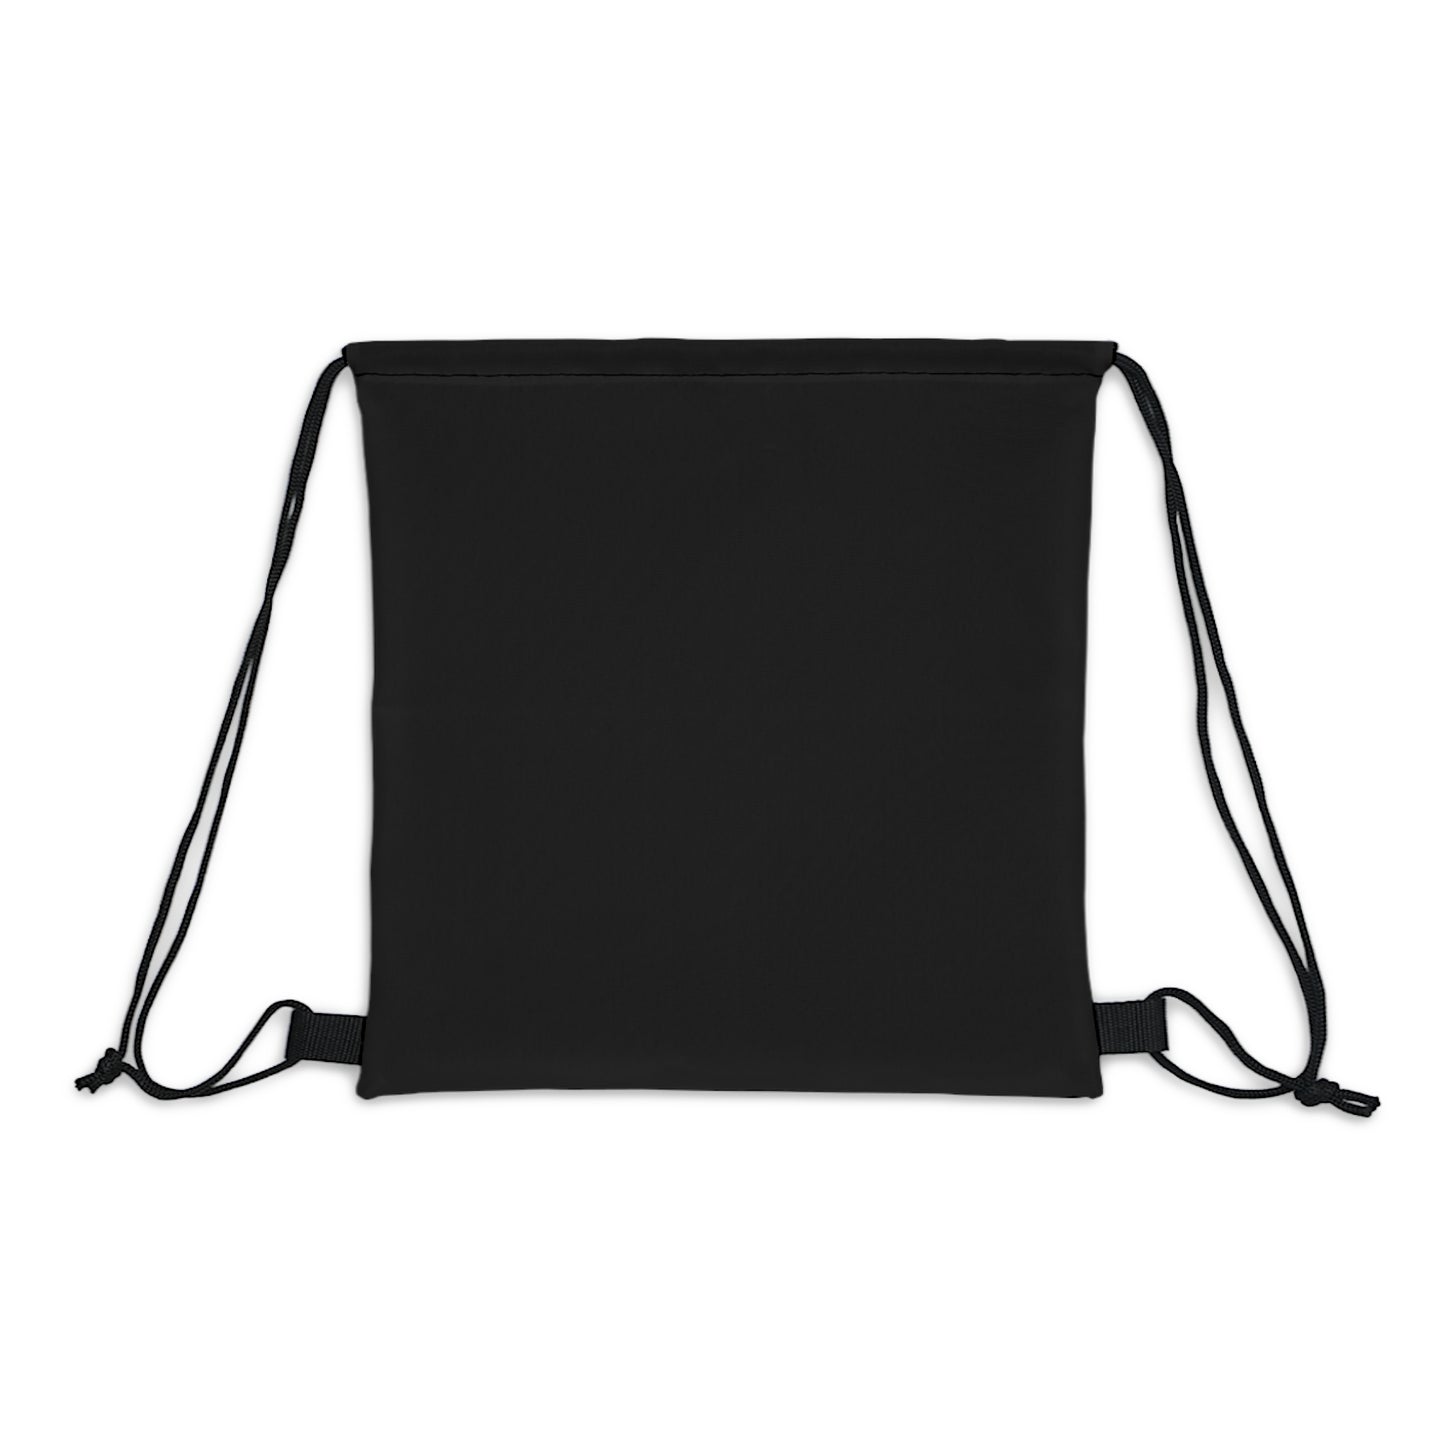 Outdoor Drawstring Bag - The Heavens Declare the Glory of God